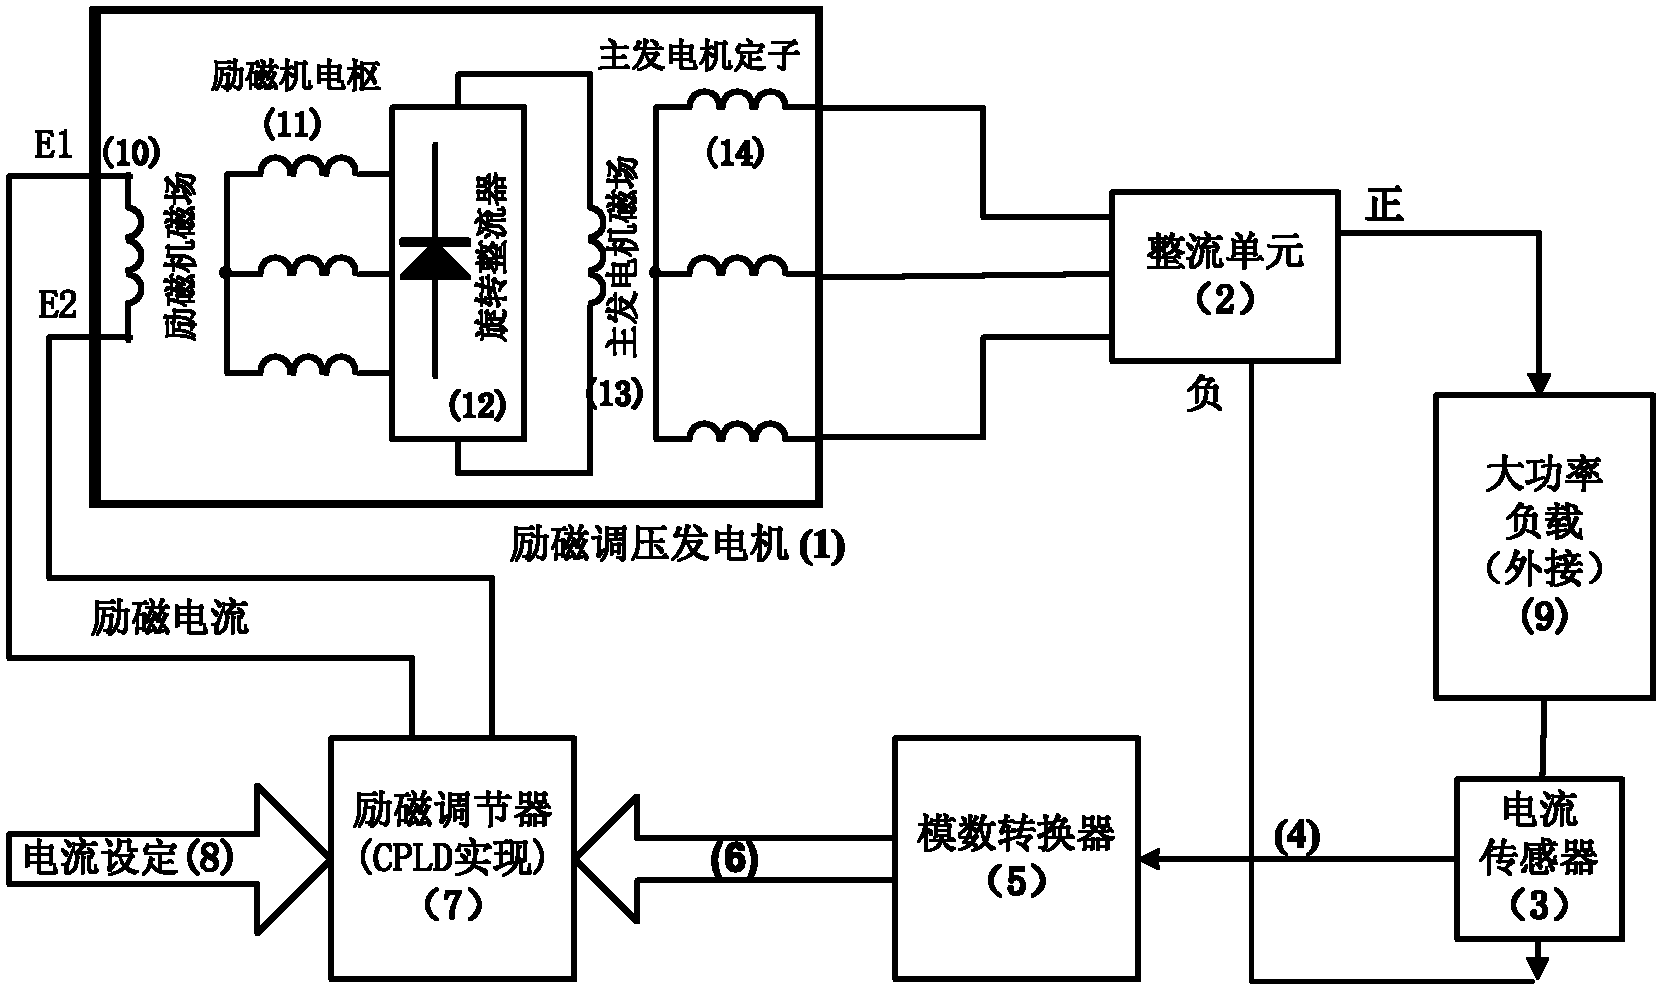 High voltage excitation constant current power supply system